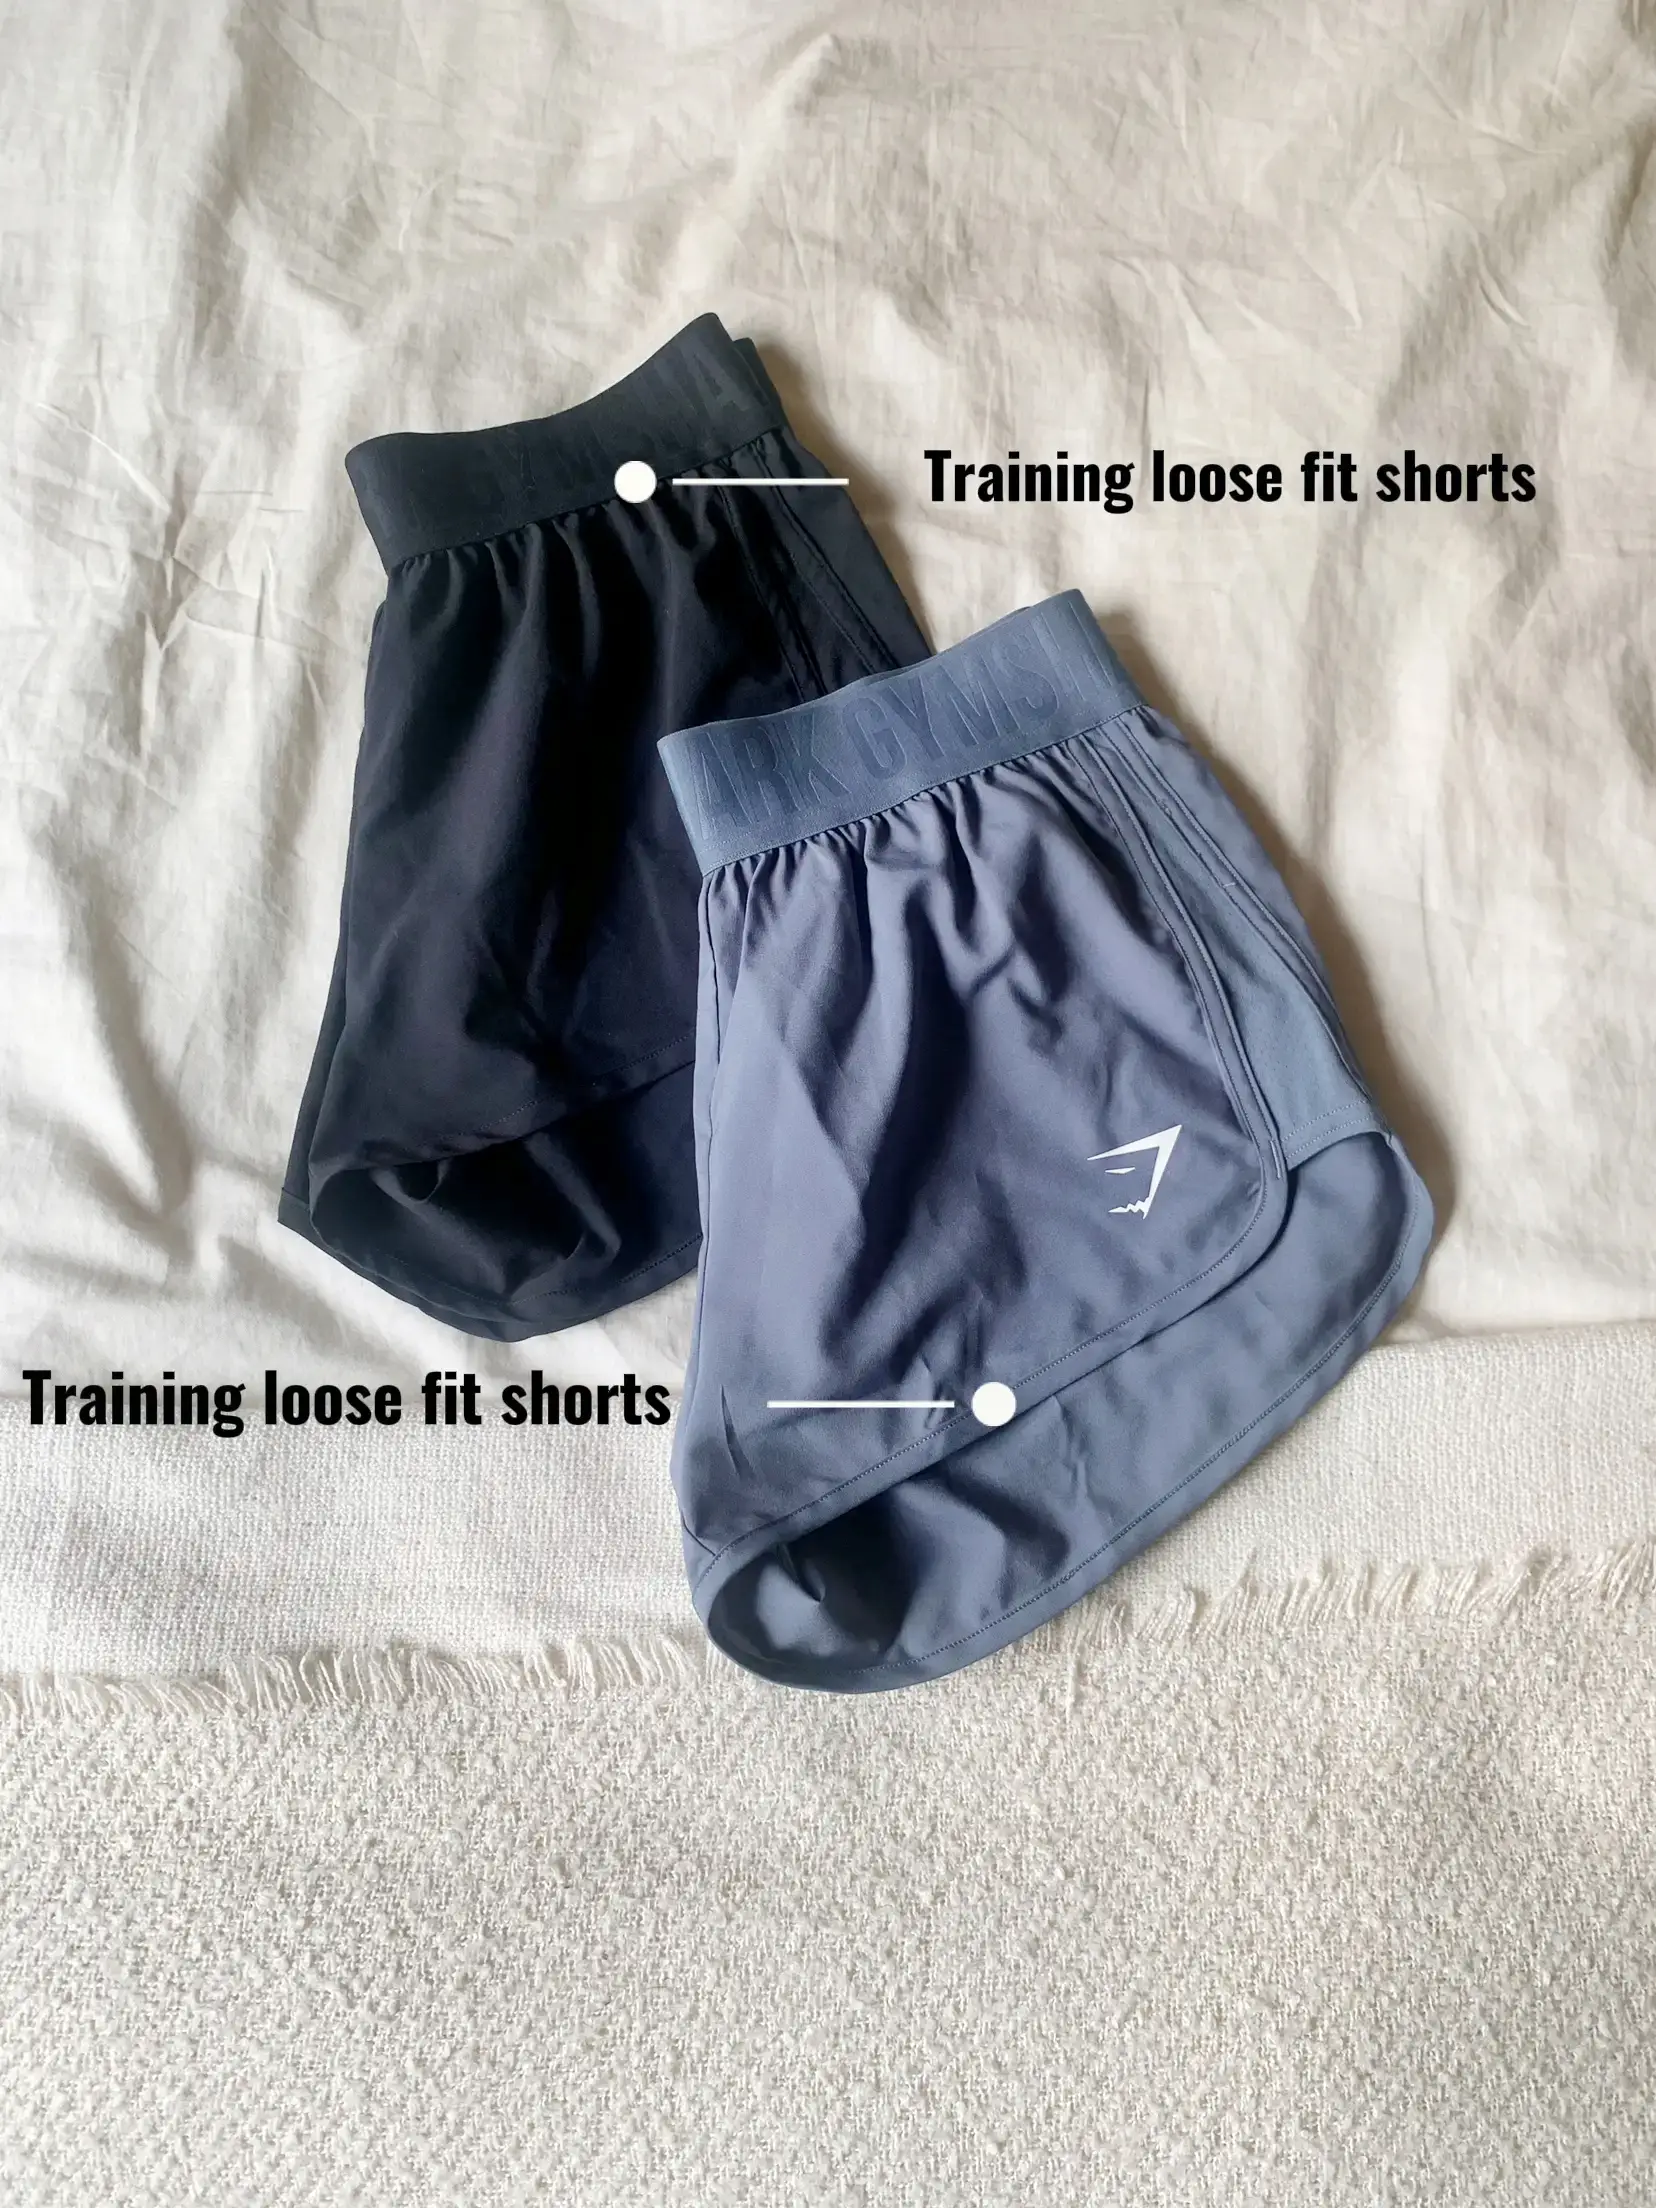 Gymshark Workout Loose Fit Shorts Women's Fitness Sport Shorts Pants Shorts